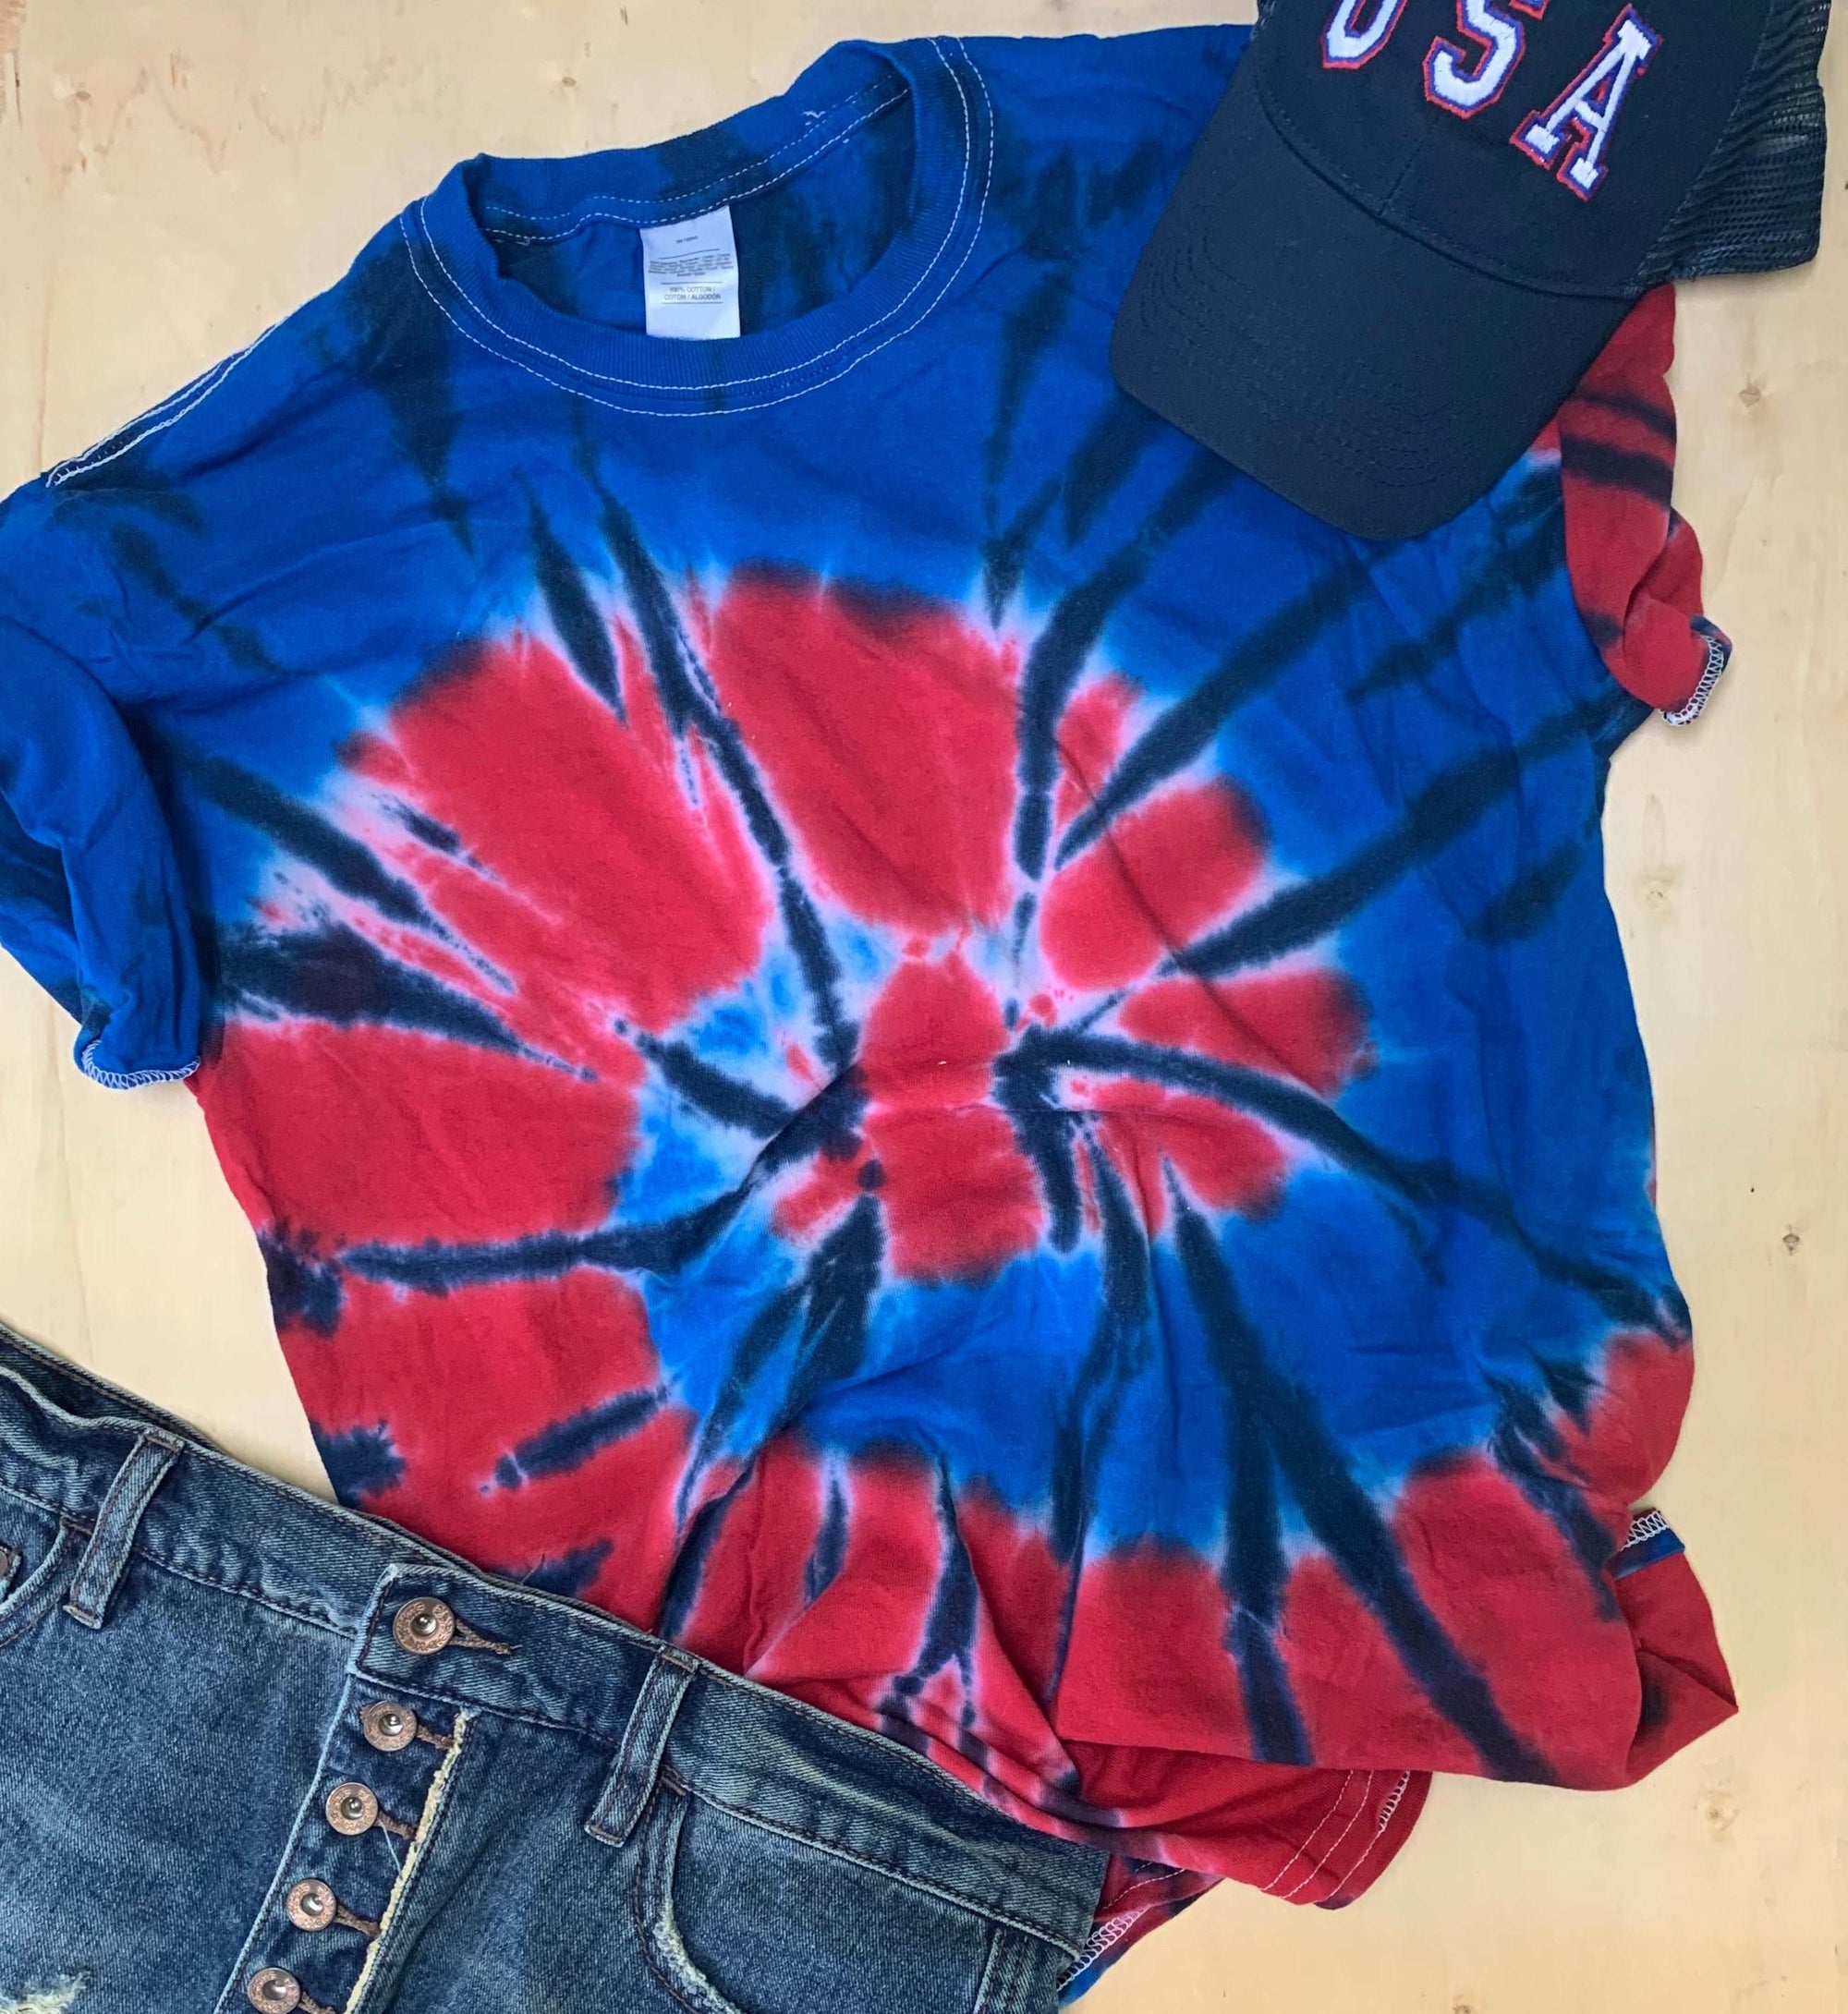 Red White and Blue Tie Dye Shirt USA 4th of July Tie Dye Shirt